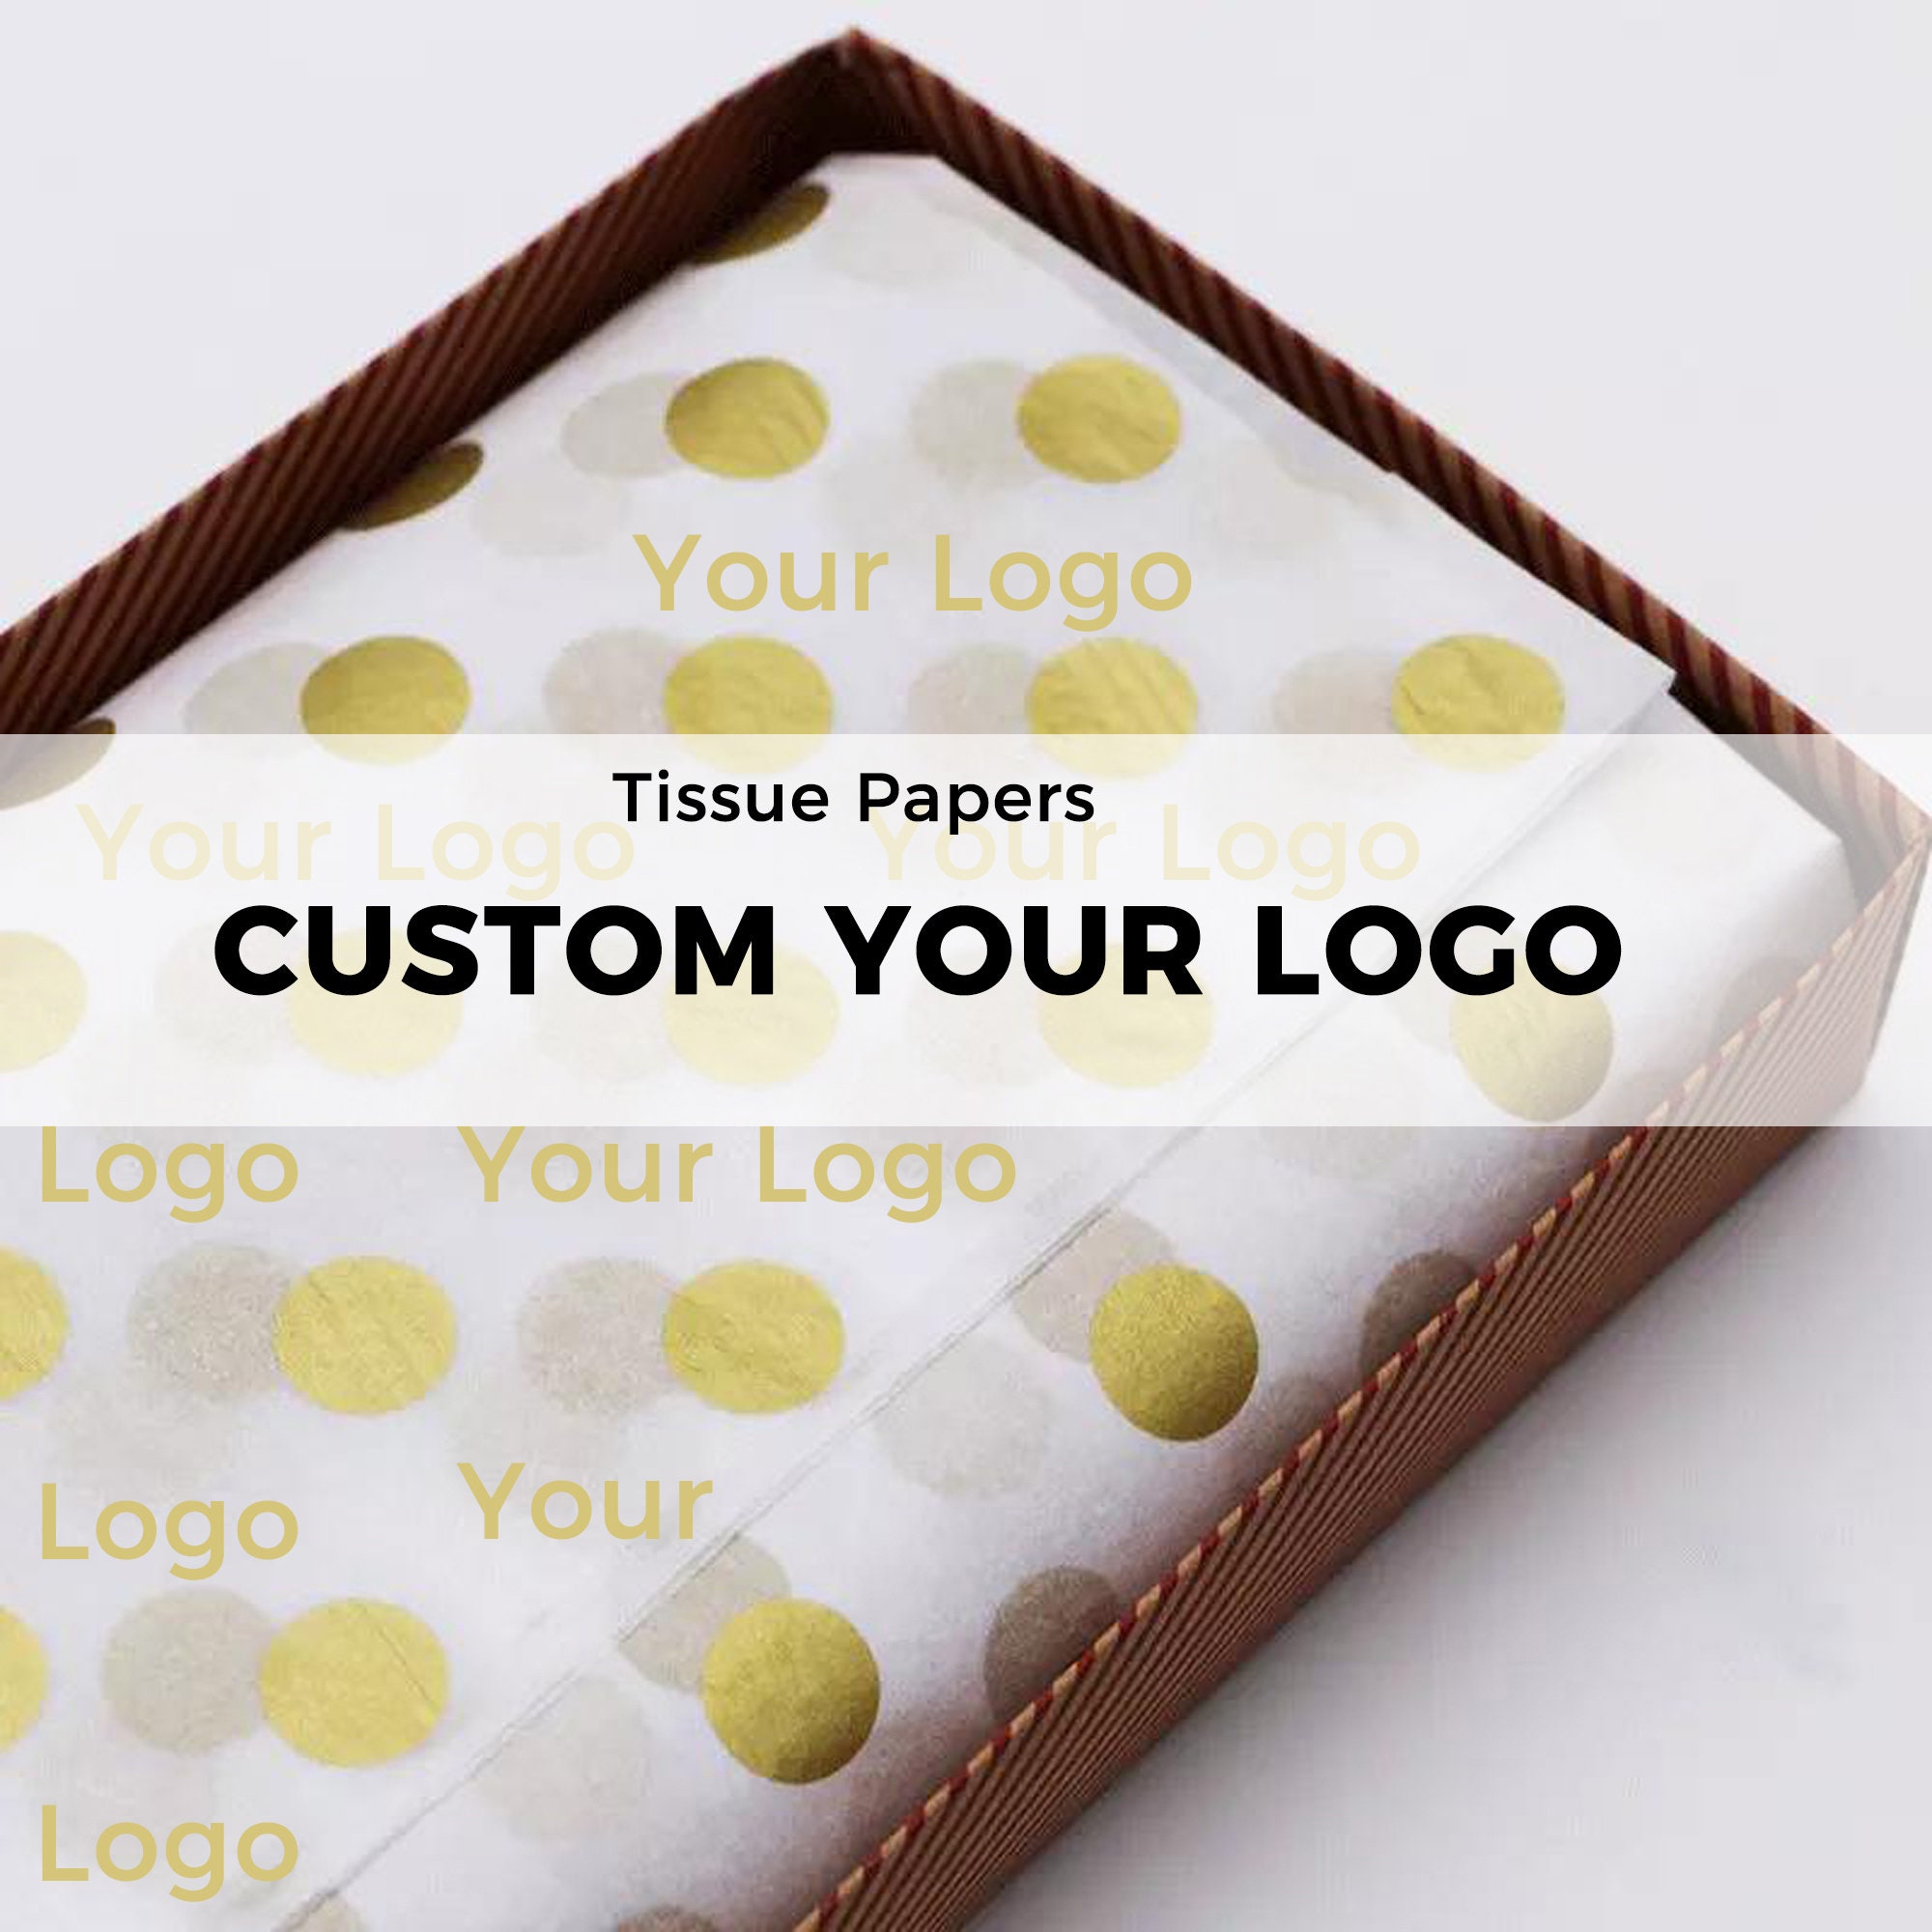 CUSTOM Tissue Paper, Personalized Tissue Paper, Custom Logo Tissue Paper,  Personalized Gift Tissue Paper, Branded Small Business Packaging 